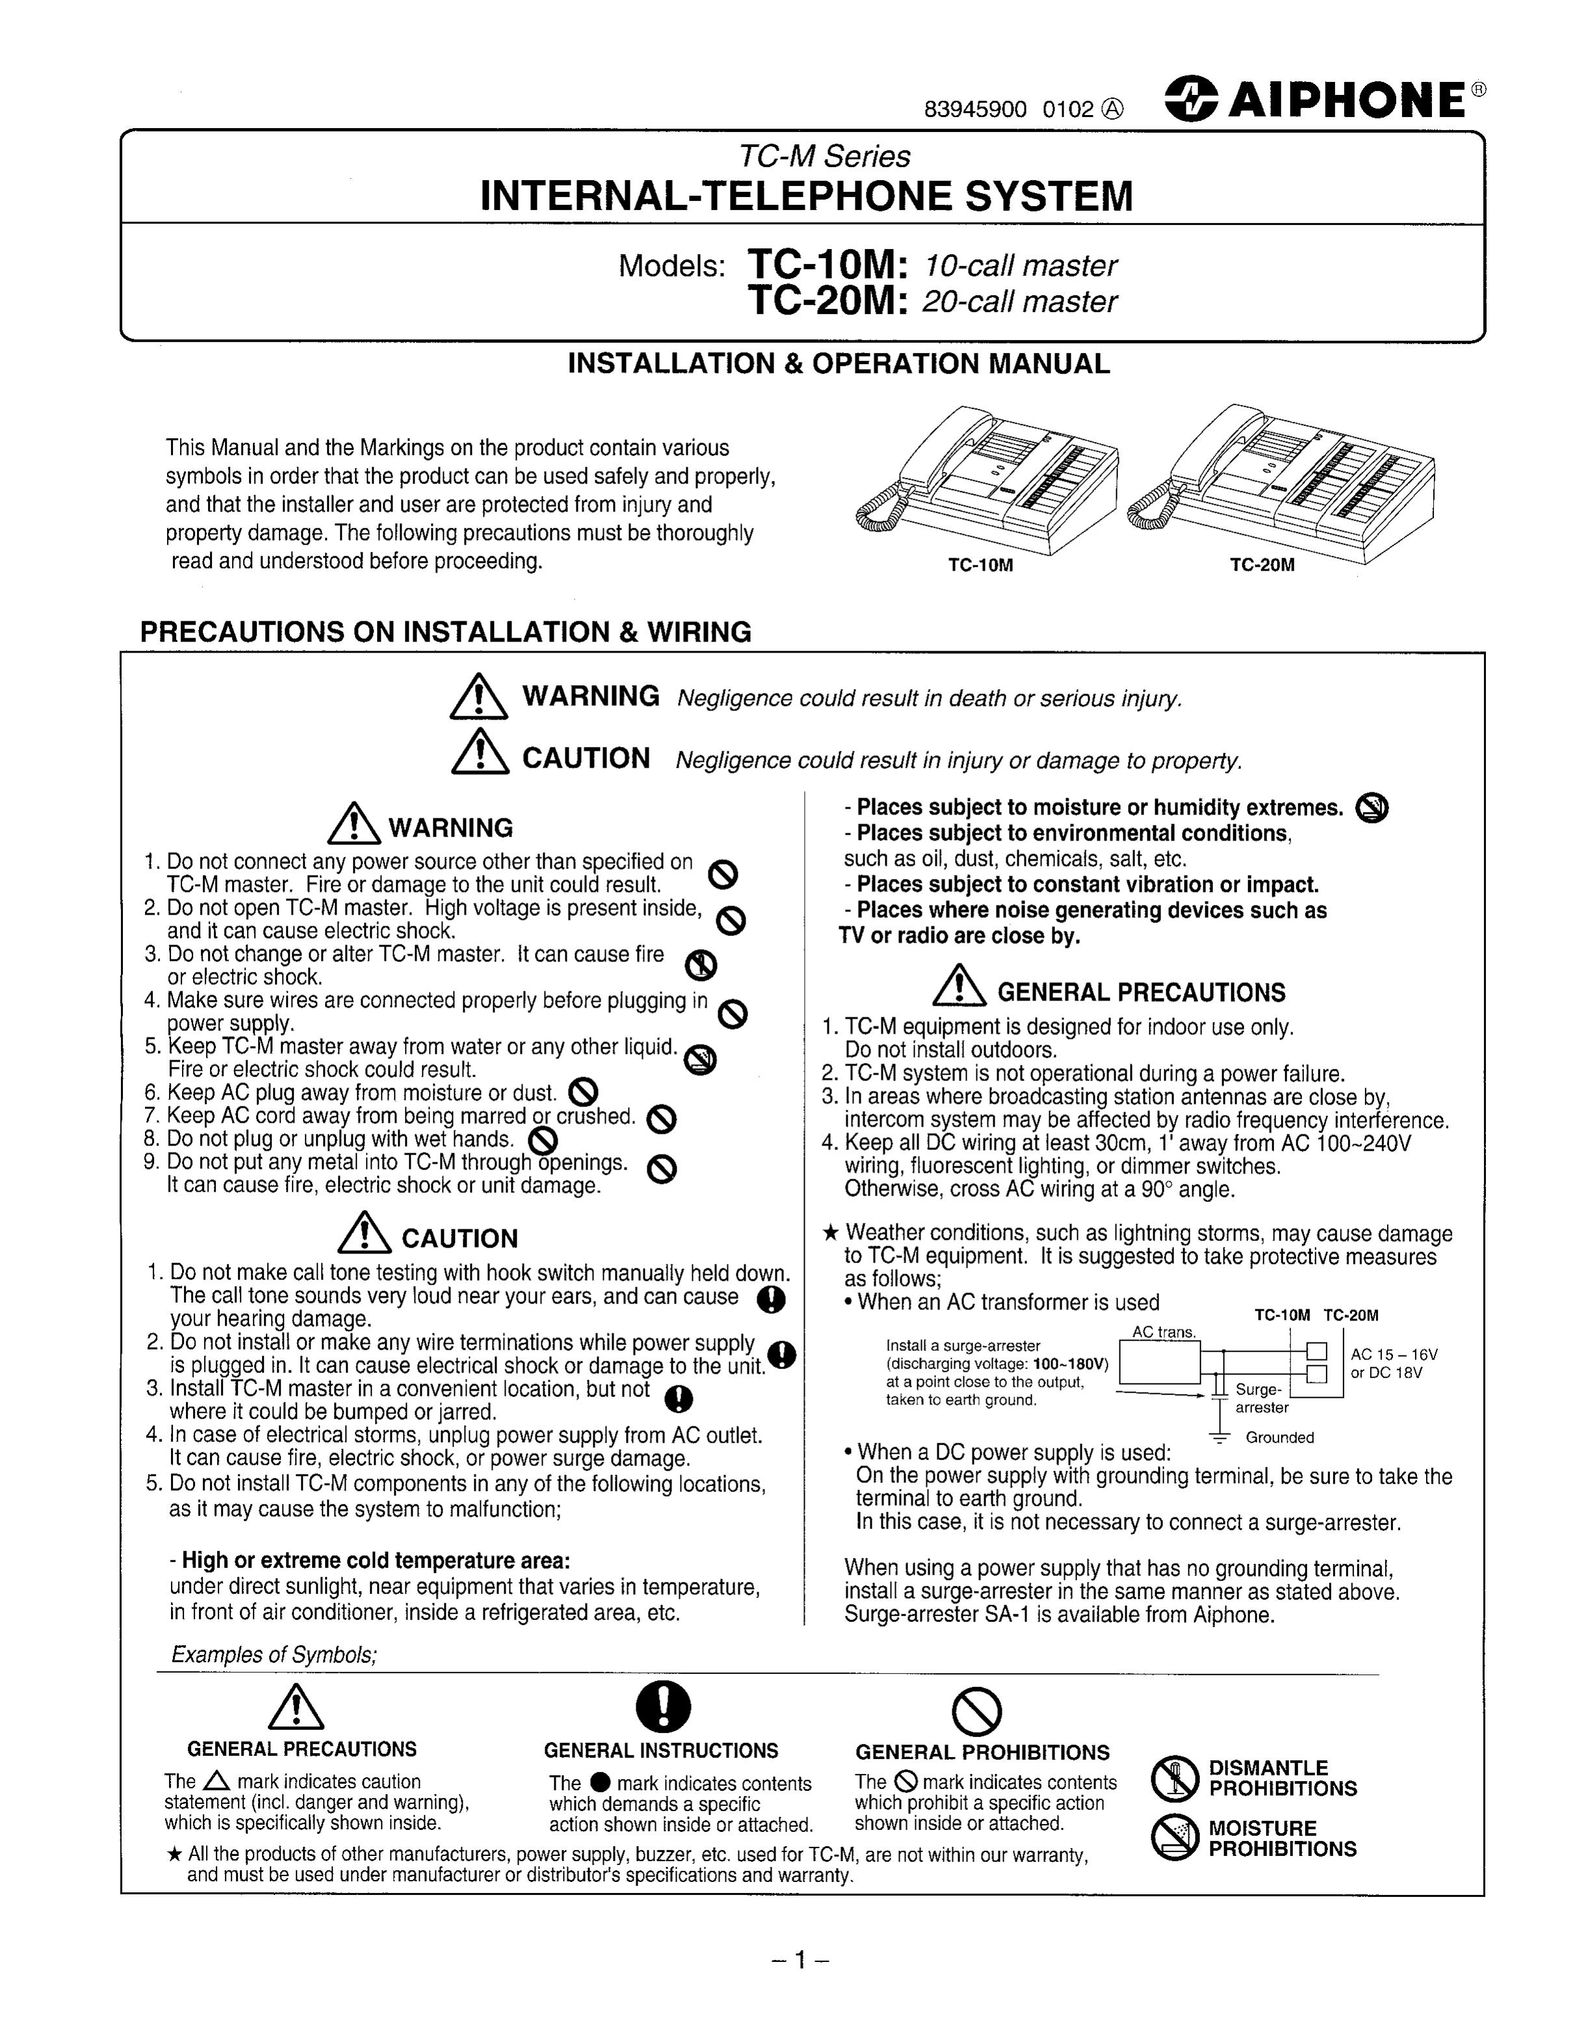 Aiphone TC-10M Cordless Telephone User Manual (Page 1)